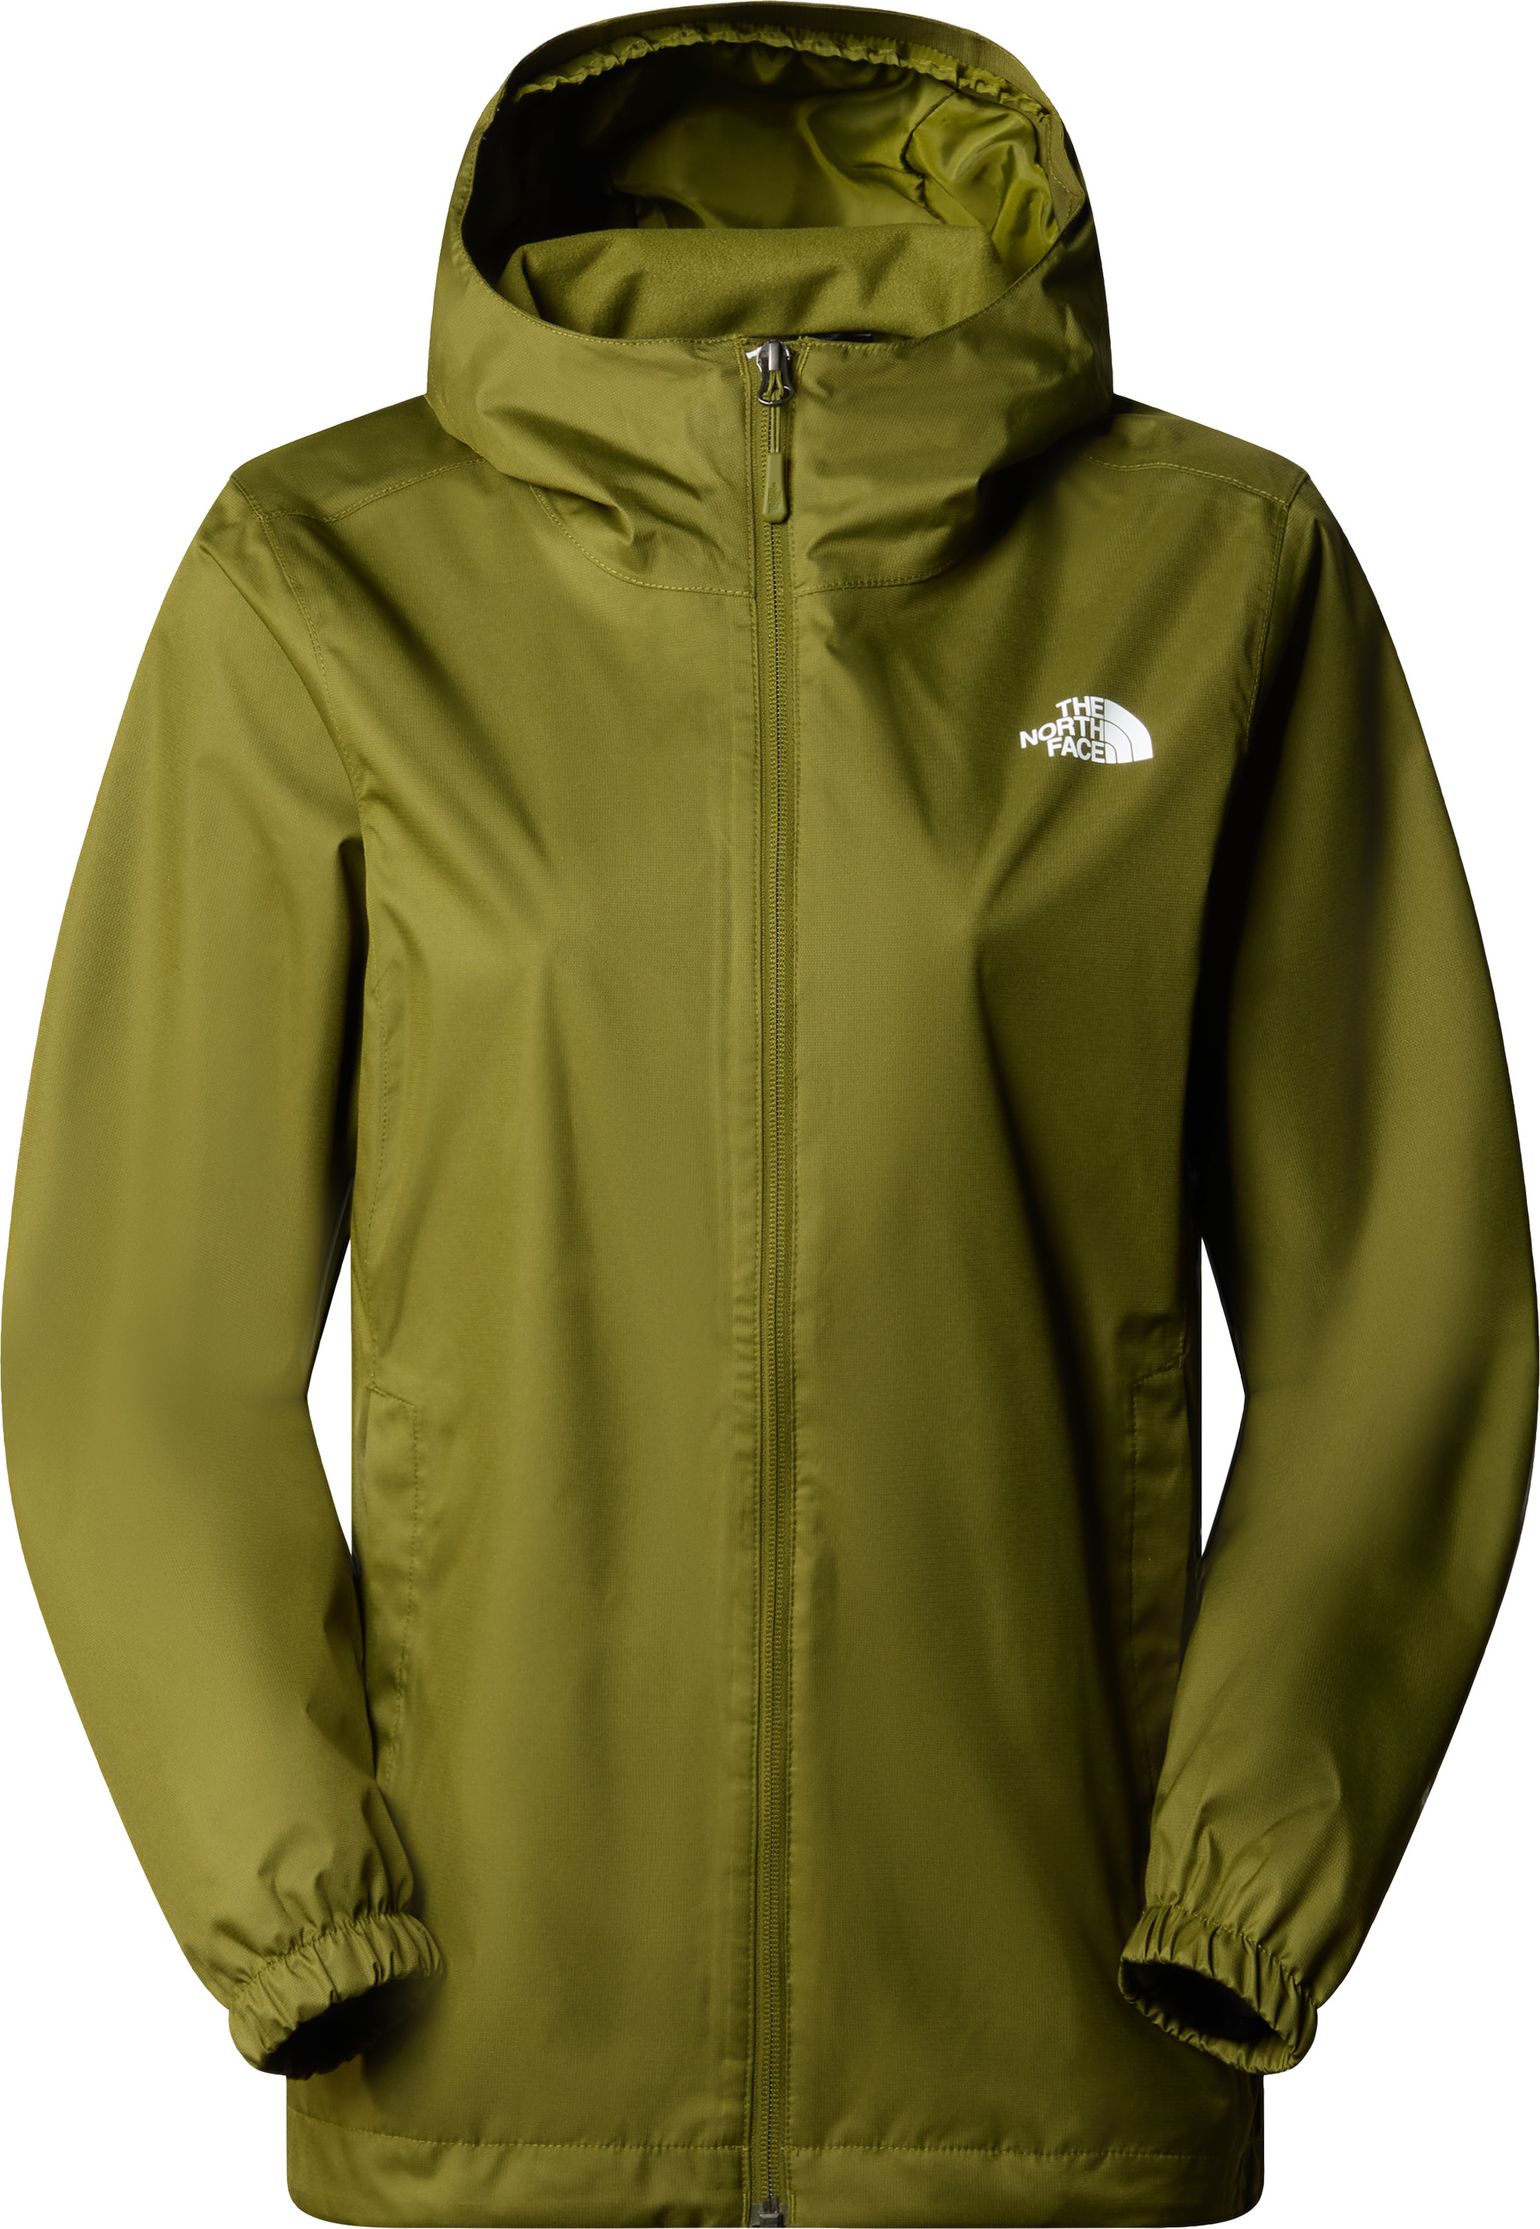 The North Face Women's Quest Jacket Forest Olive